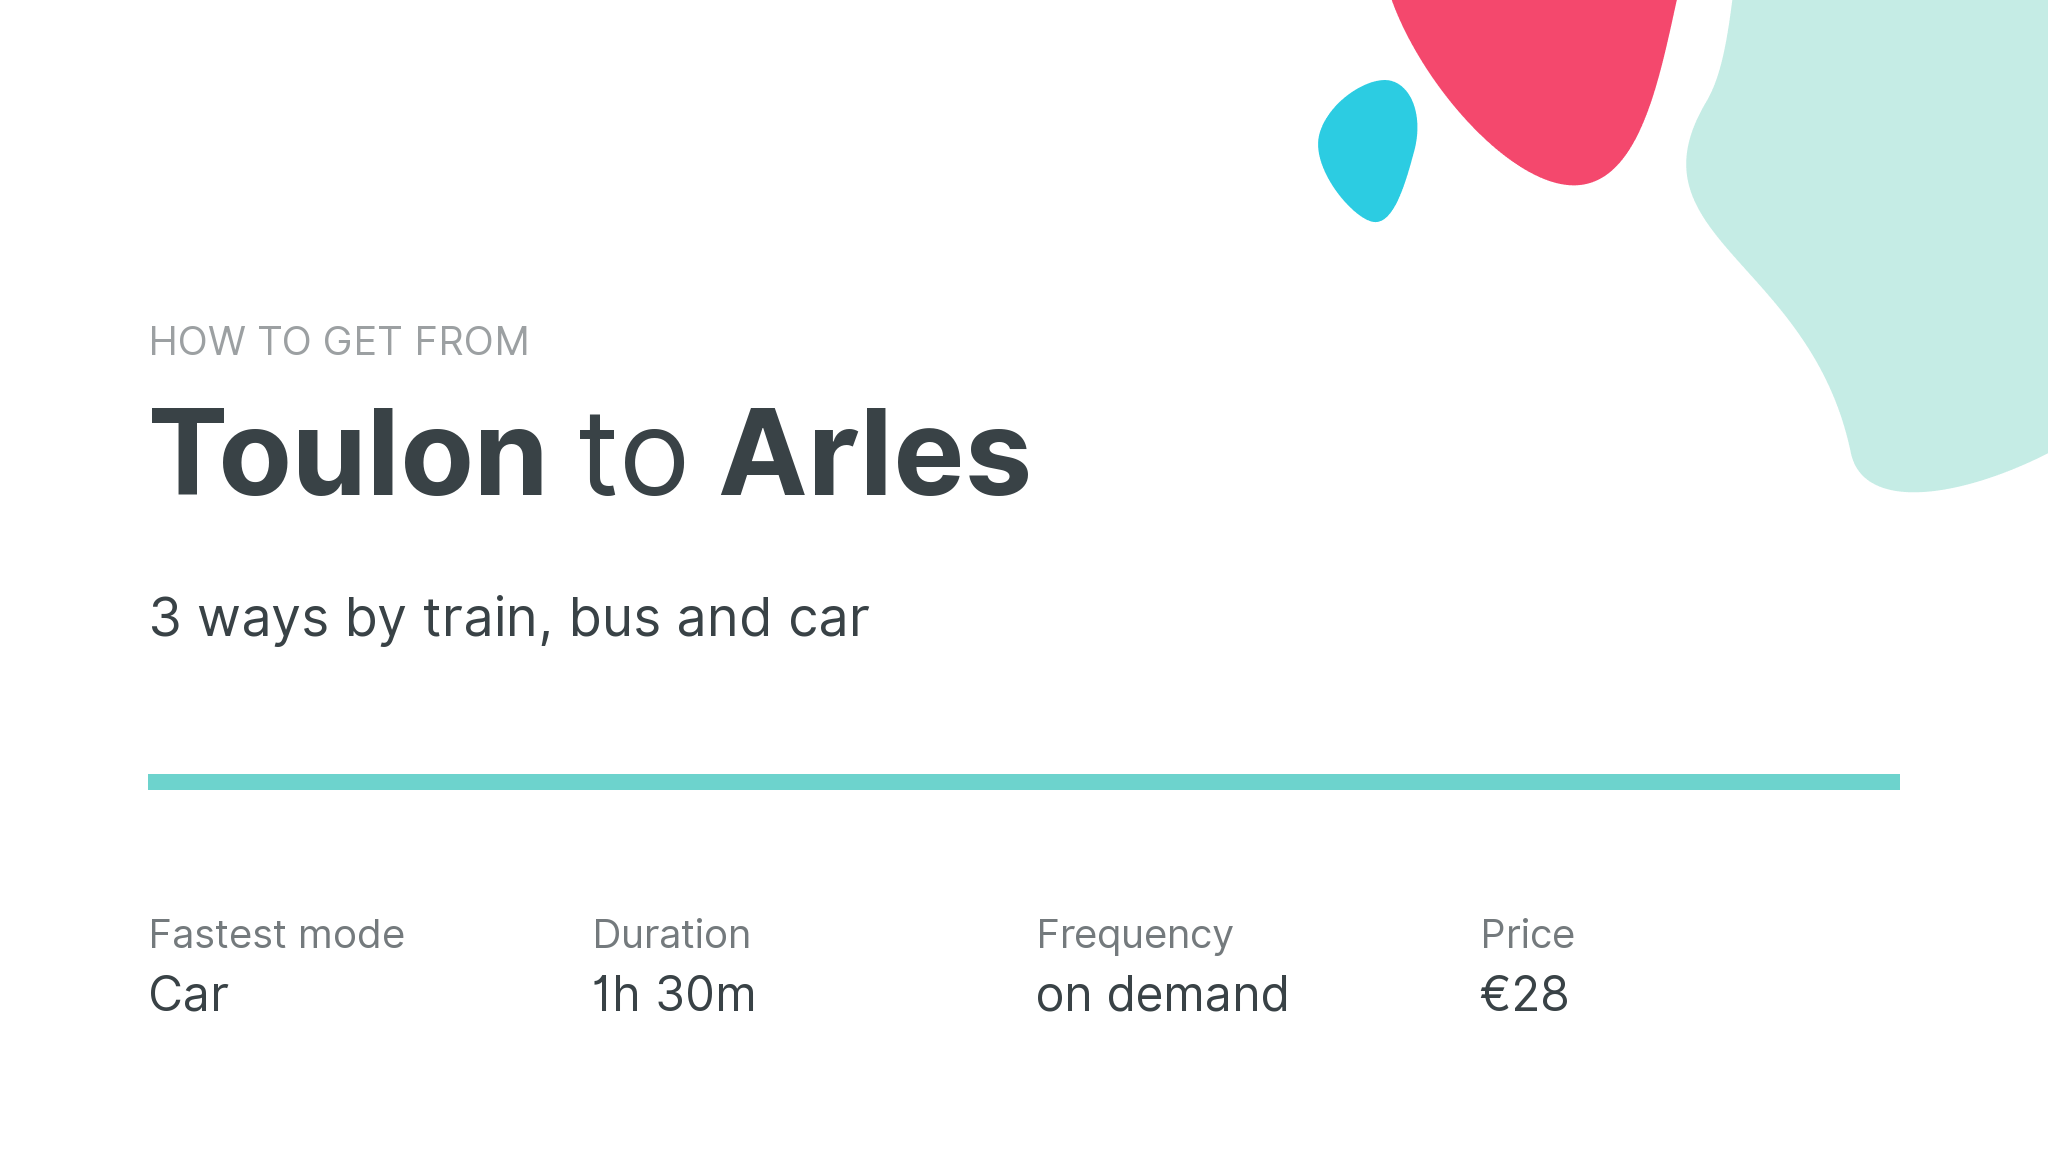 How do I get from Toulon to Arles